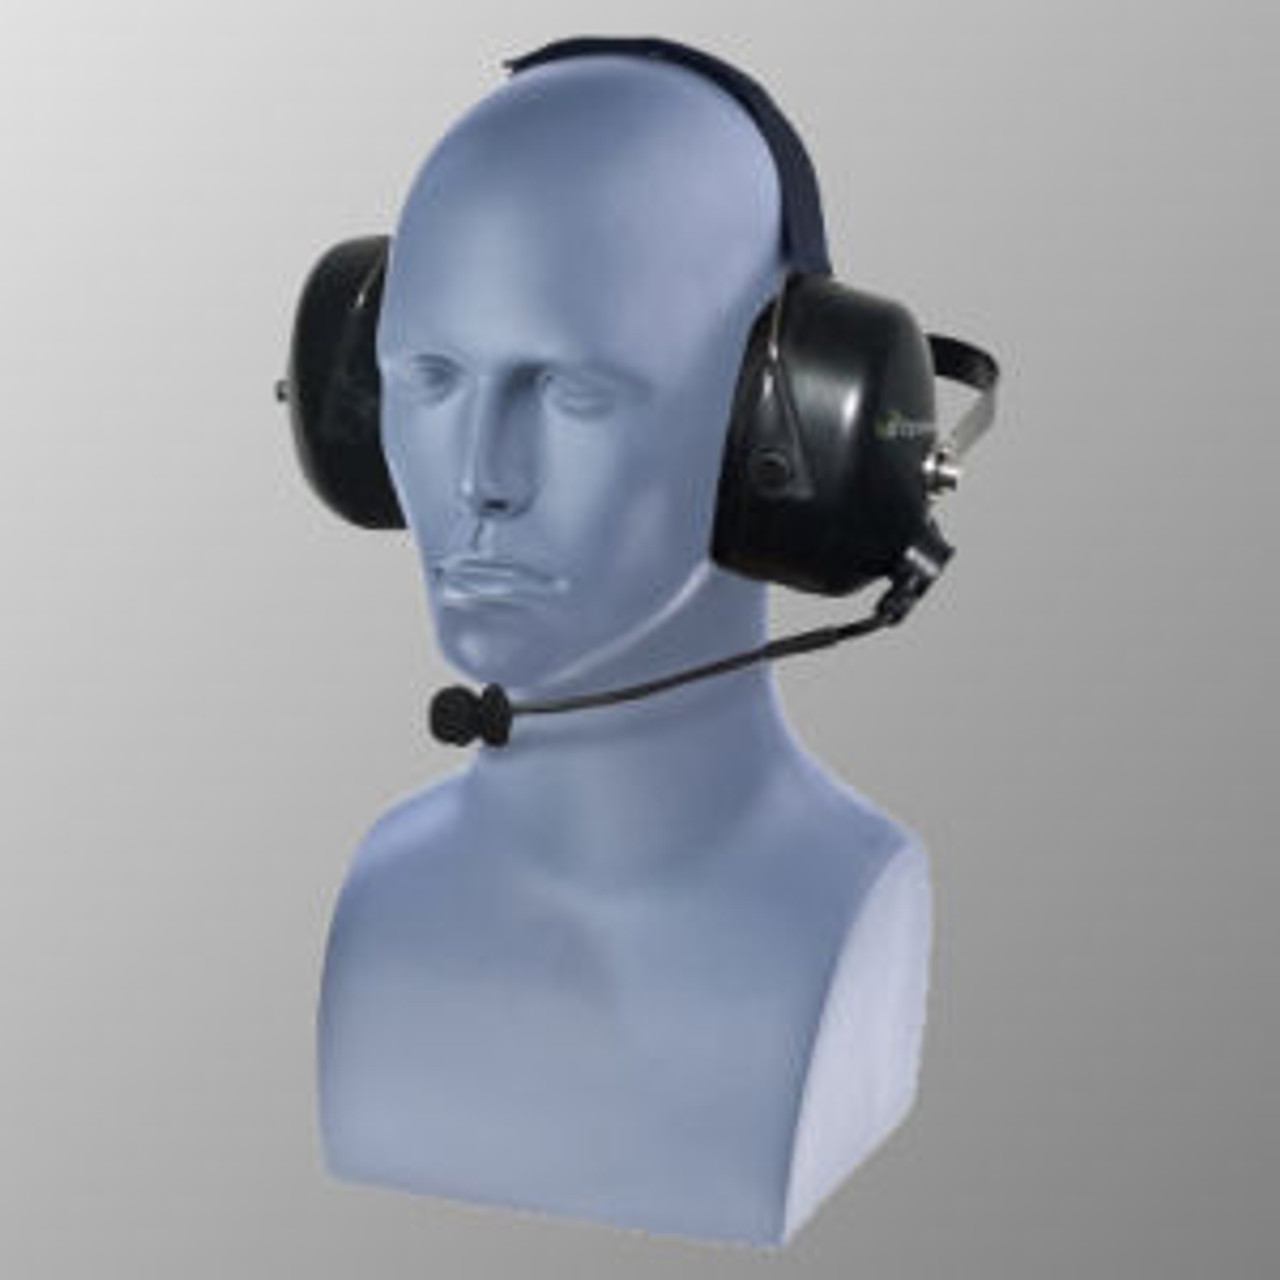 Motorola JT1000 Noise Canceling Double Muff Behind The Head Headset